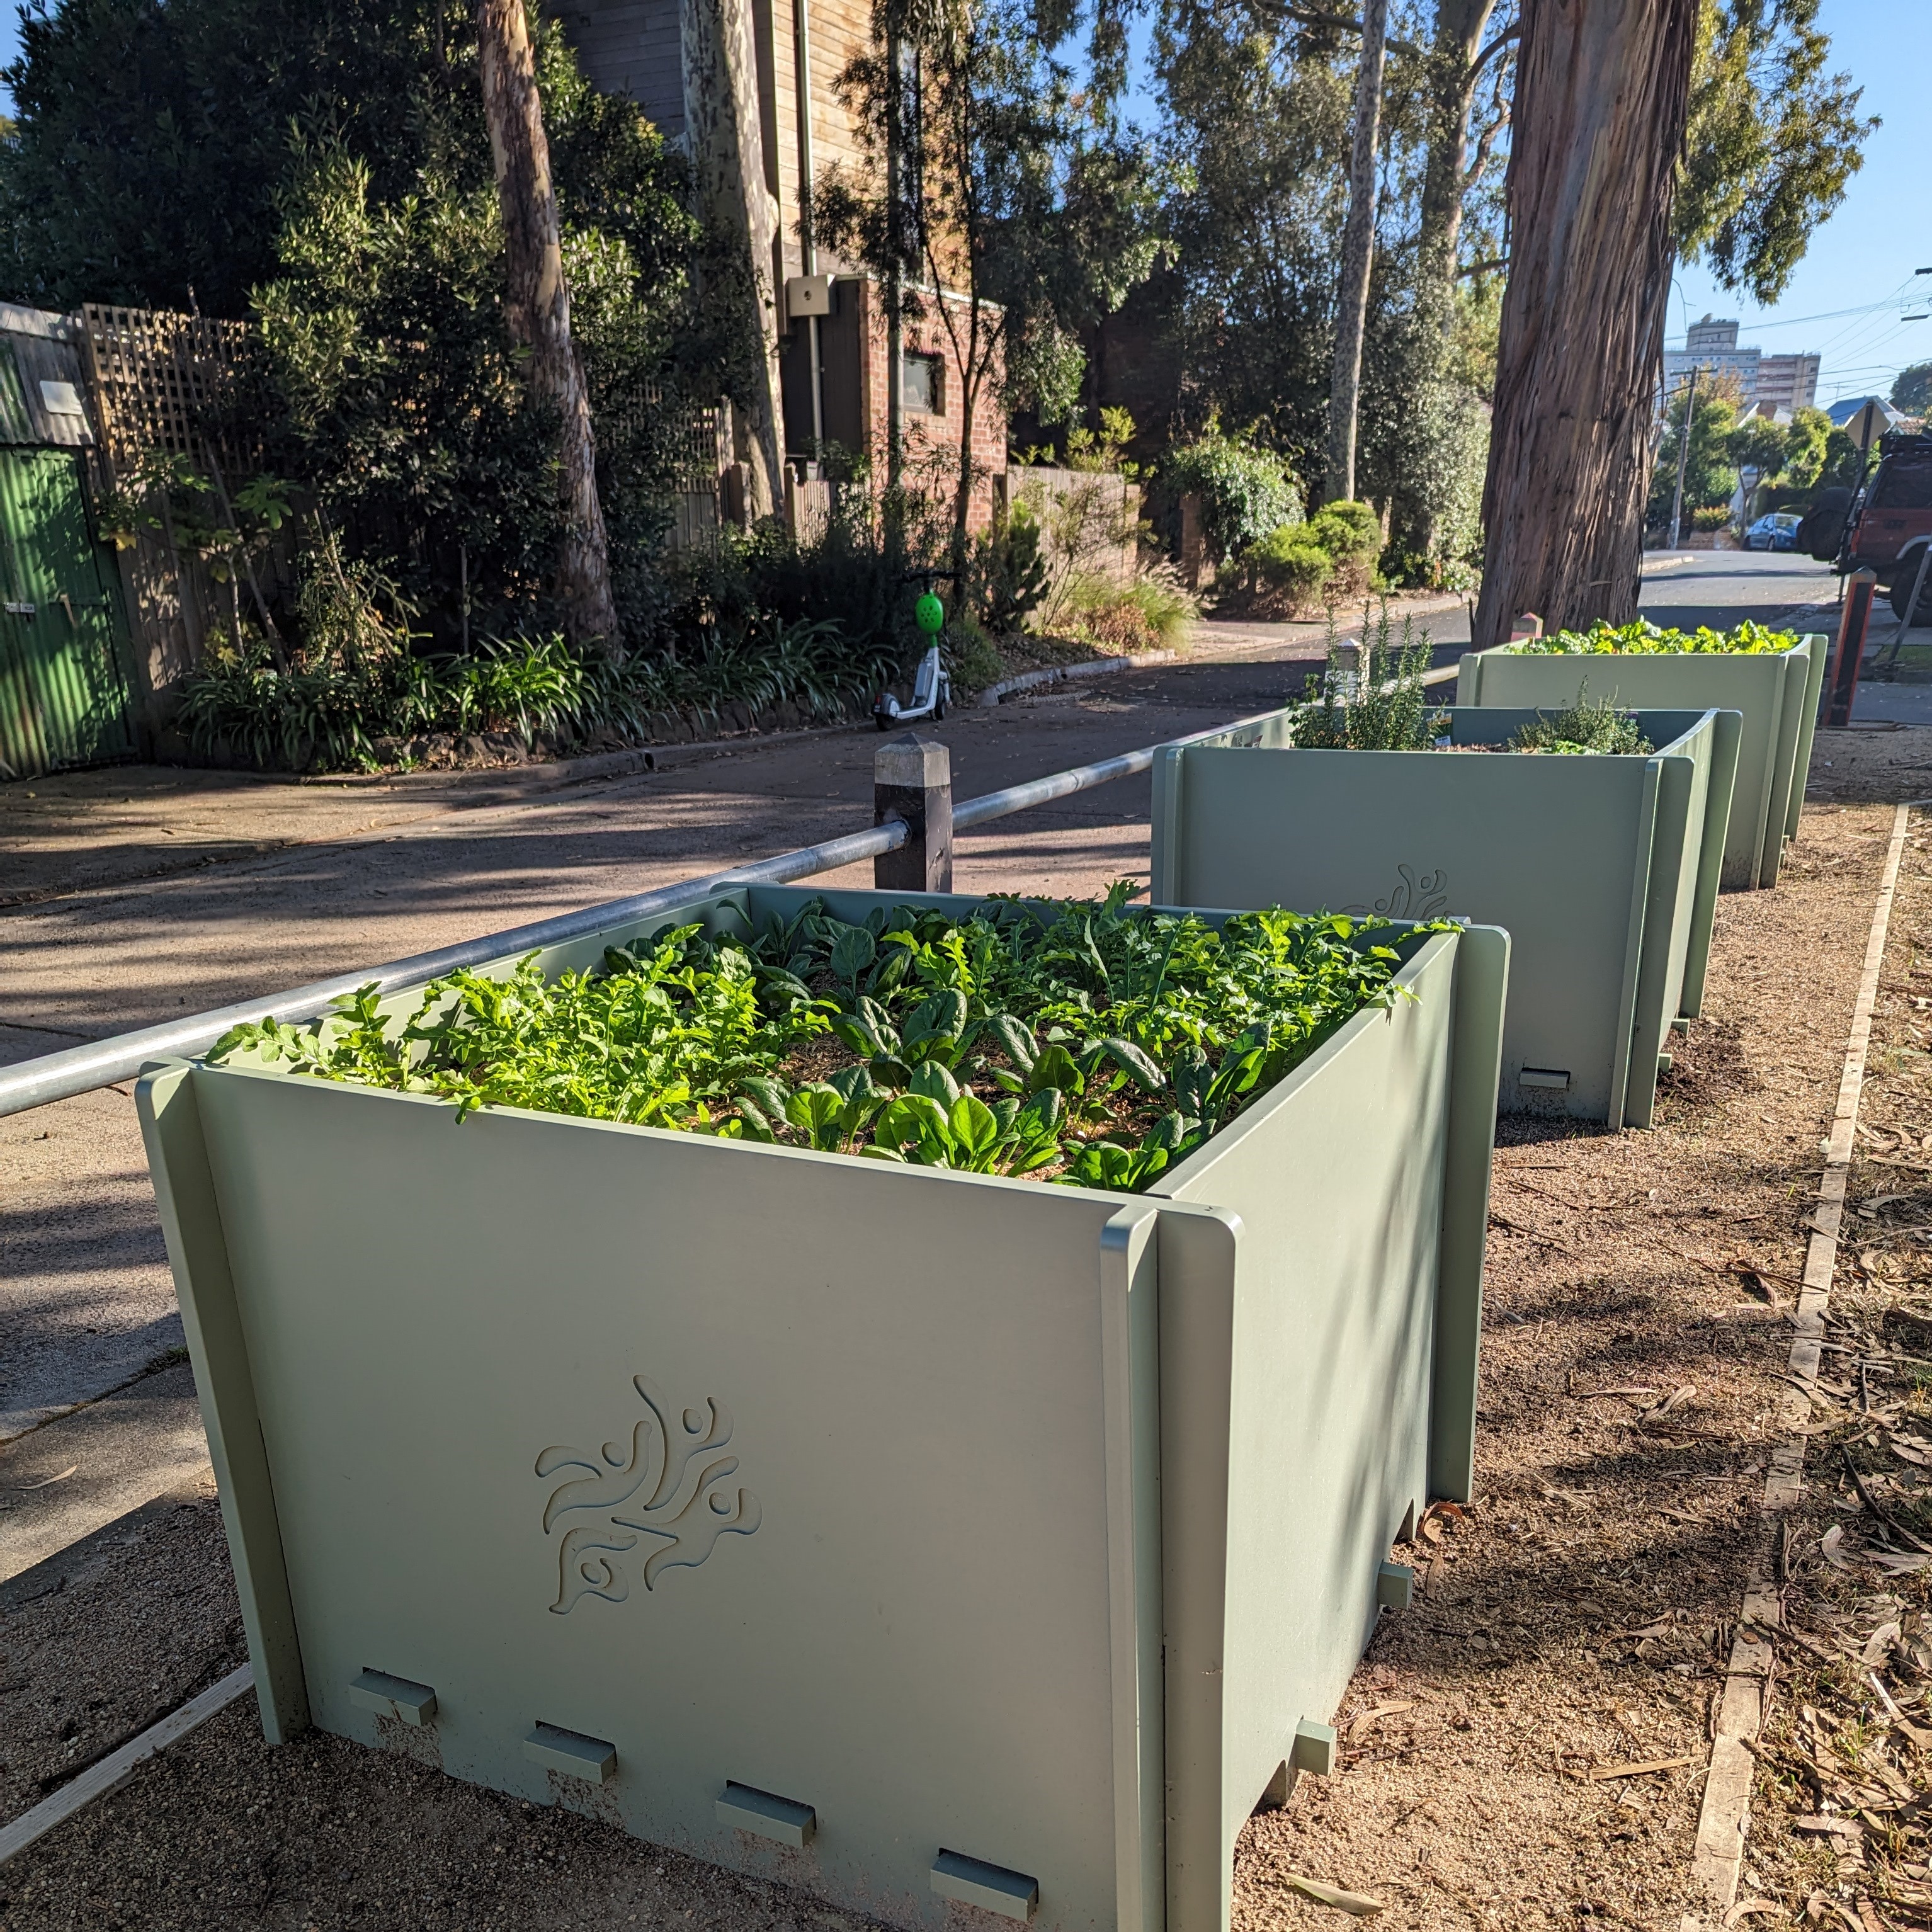 Planter boxes that are part of the Small Communal Growing Spaces trial. 